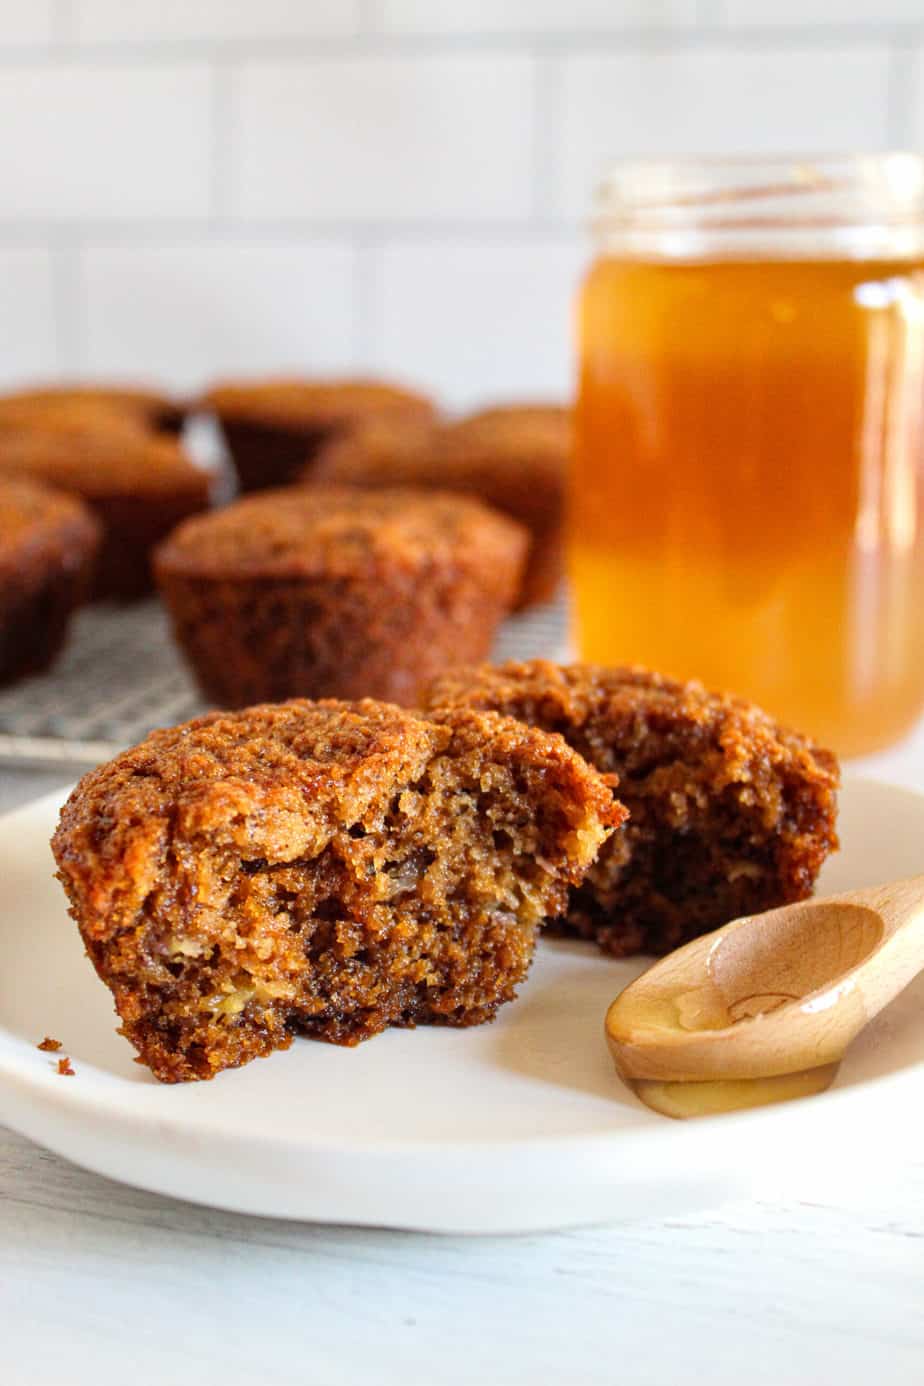 https://zestforbaking.com/wp-content/uploads/2022/05/flax-seed-muffins-on-a-plate-scaled.jpg